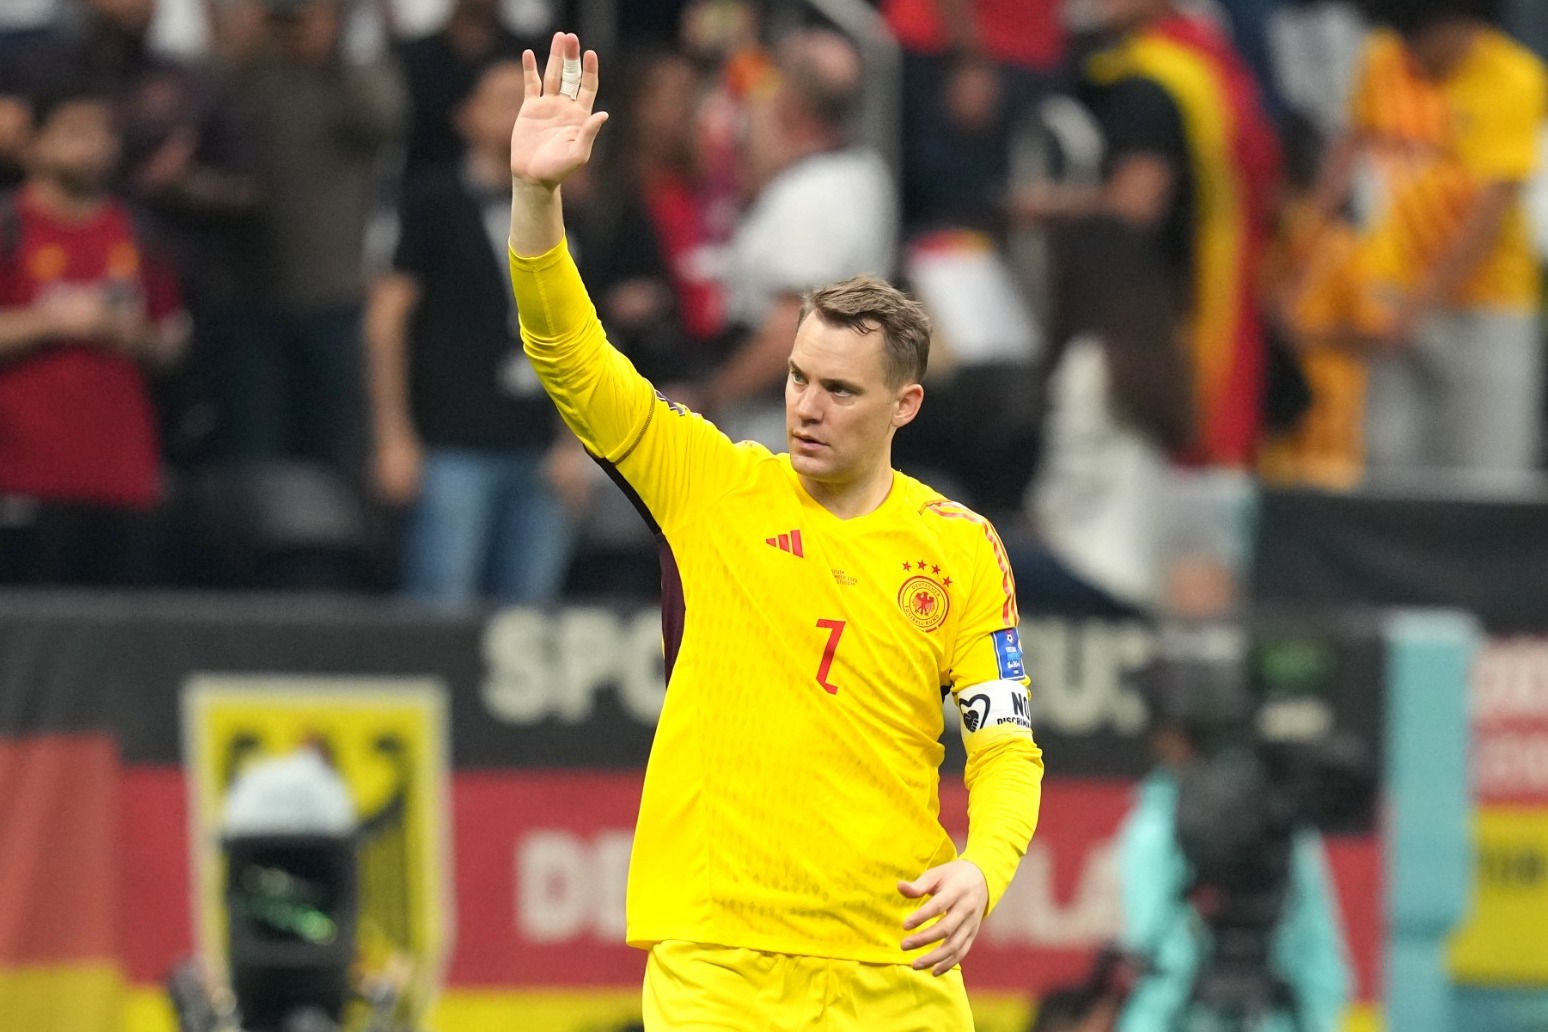 Manuel Neuer out for rest of season after breaking leg in skiing accident 